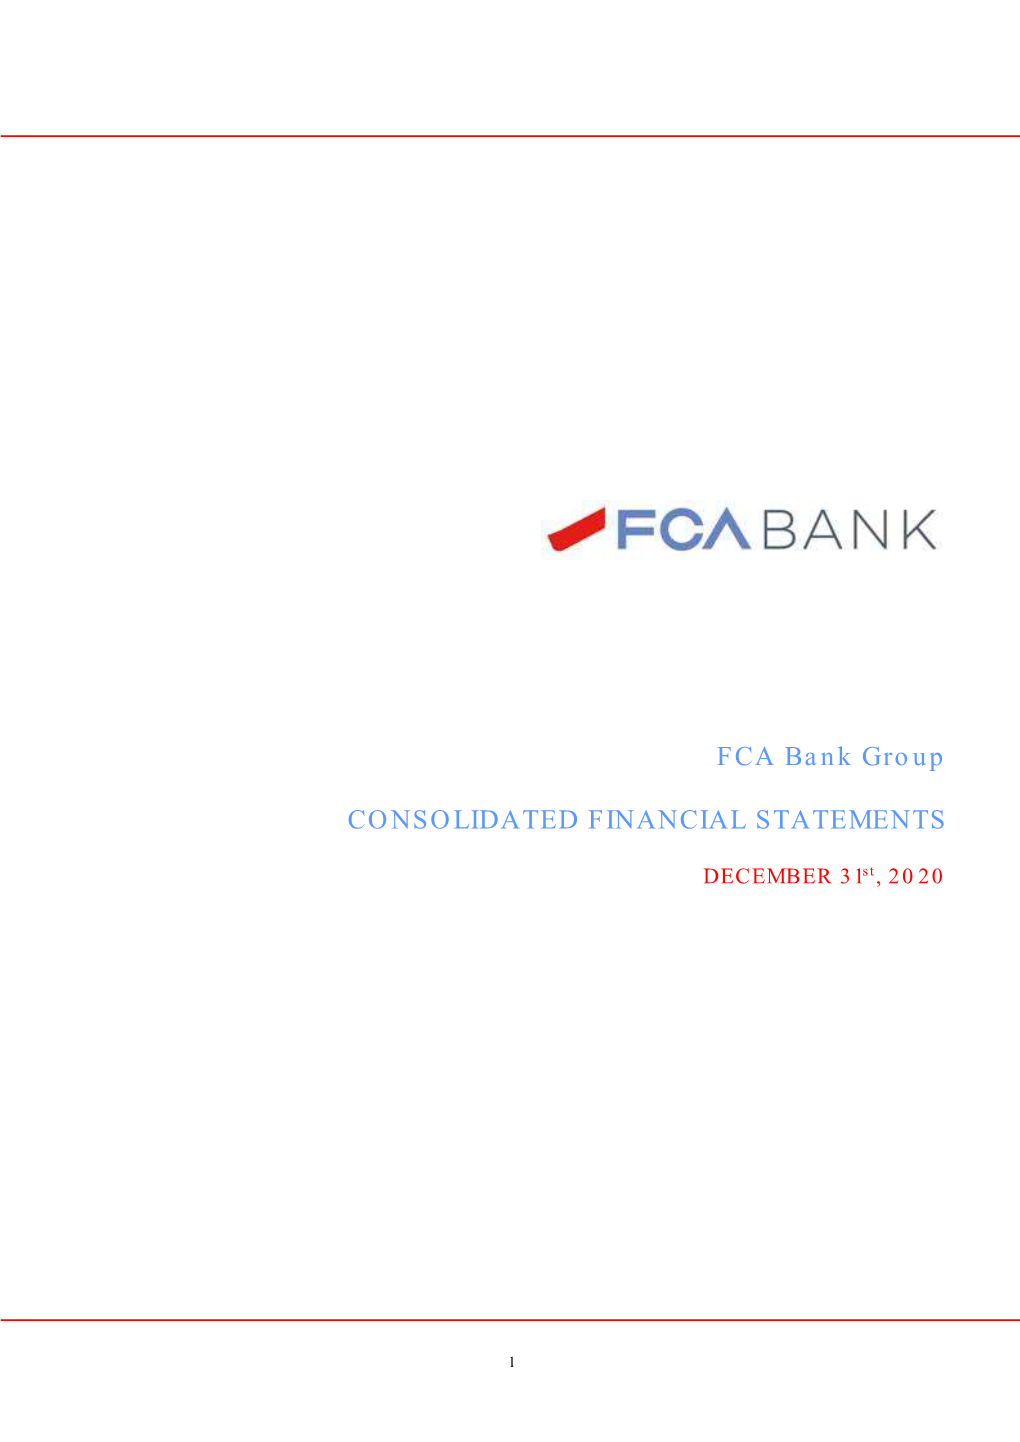 FCA Bank Group CONSOLIDATED FINANCIAL STATEMENTS